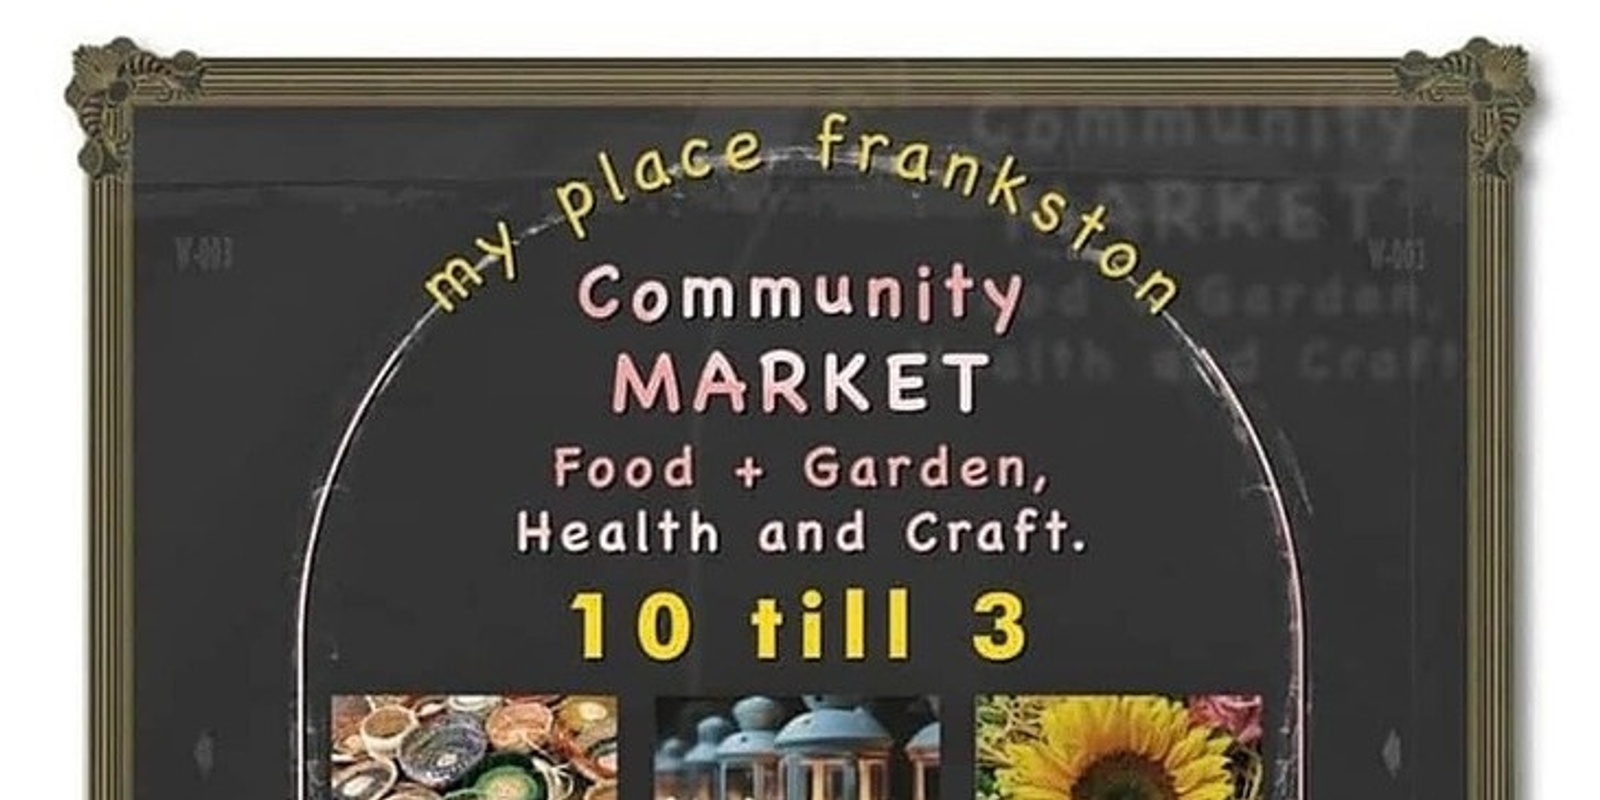 Banner image for My Place Frankston Community maket